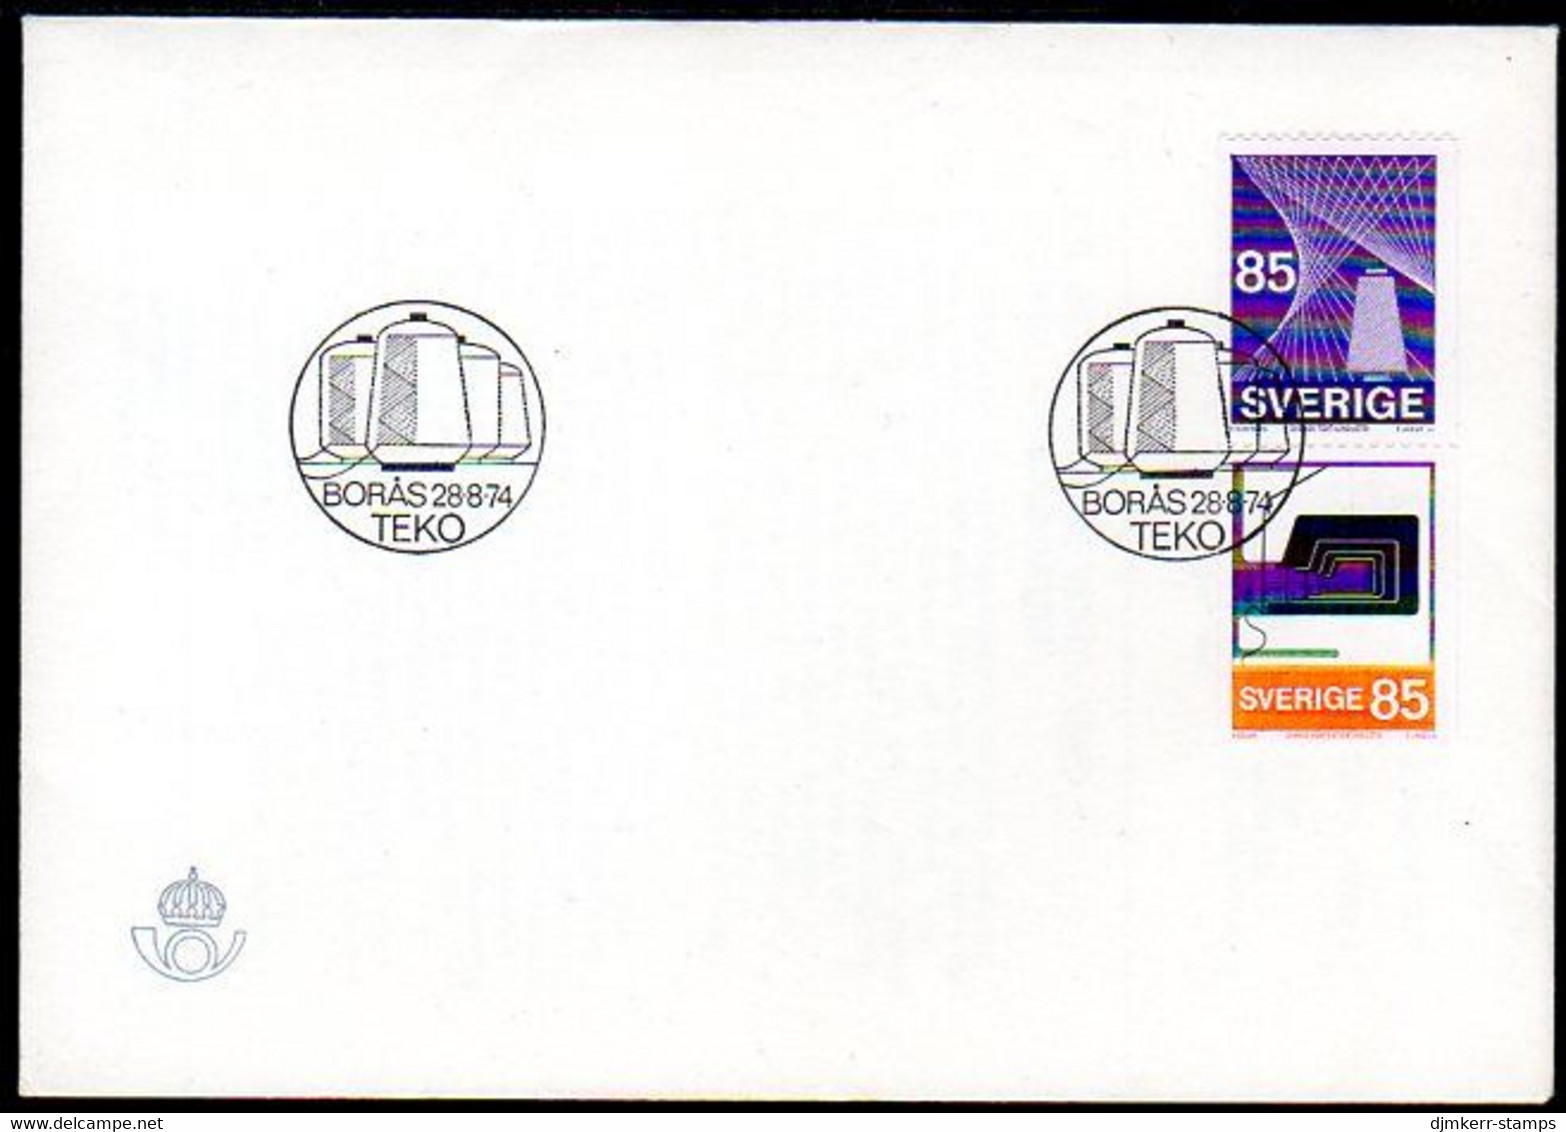 SWEDEN 1974 Textile And Confectionery Industries  FDCs.  Michel 864-65 - FDC